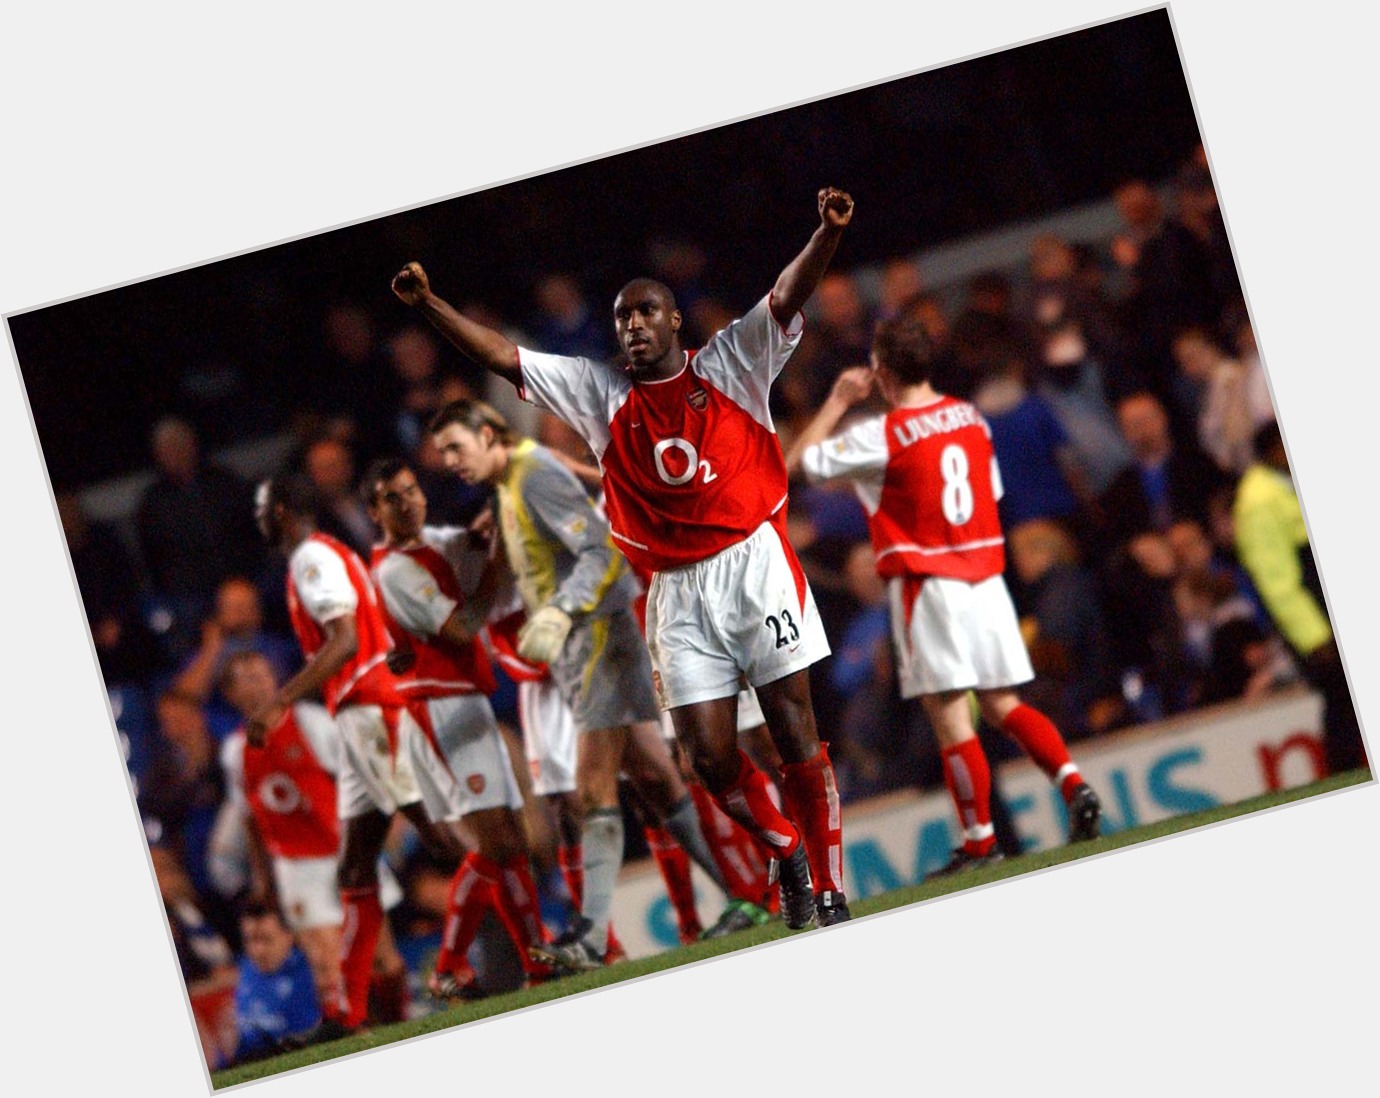 Happy Birthday to Arsenal legend Sol Campbell! 